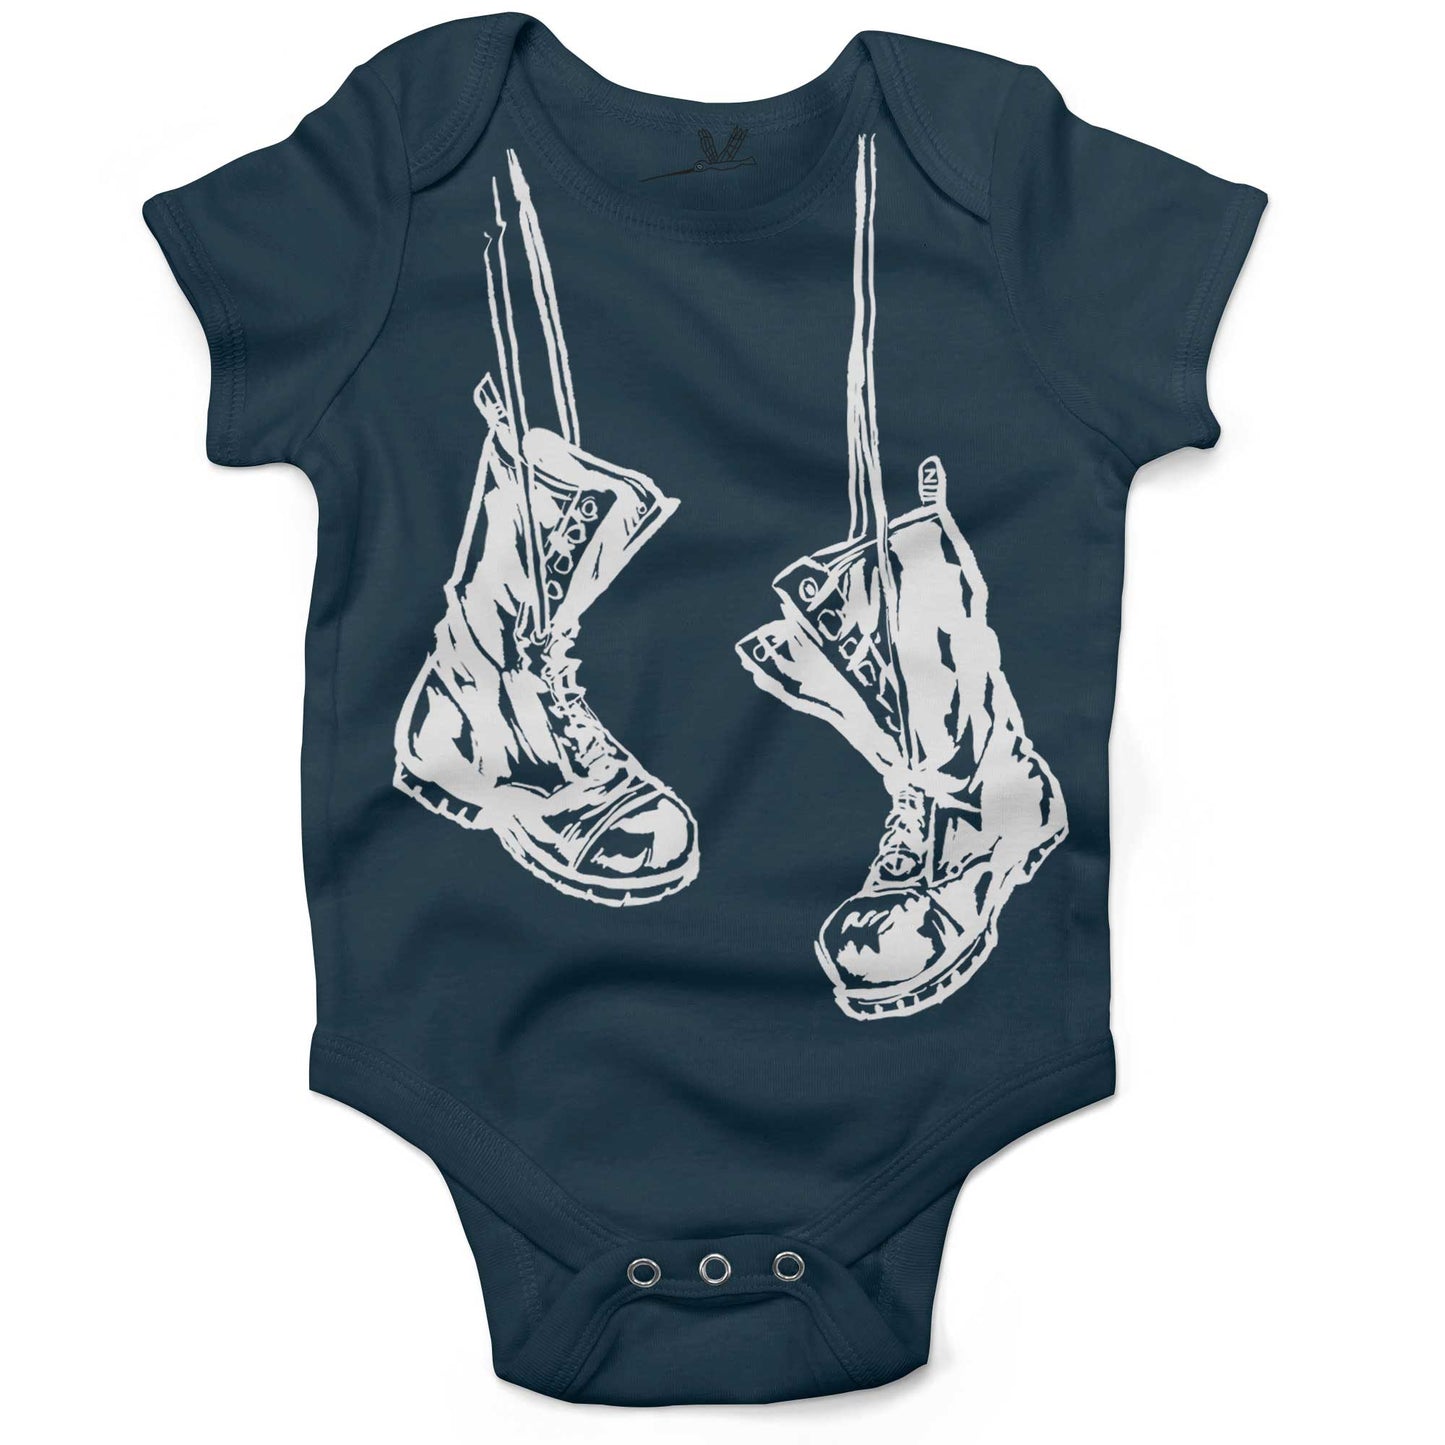 Baby Combat Boots Infant Bodysuit or Raglan Tee-Organic Pacific Blue-3-6 months